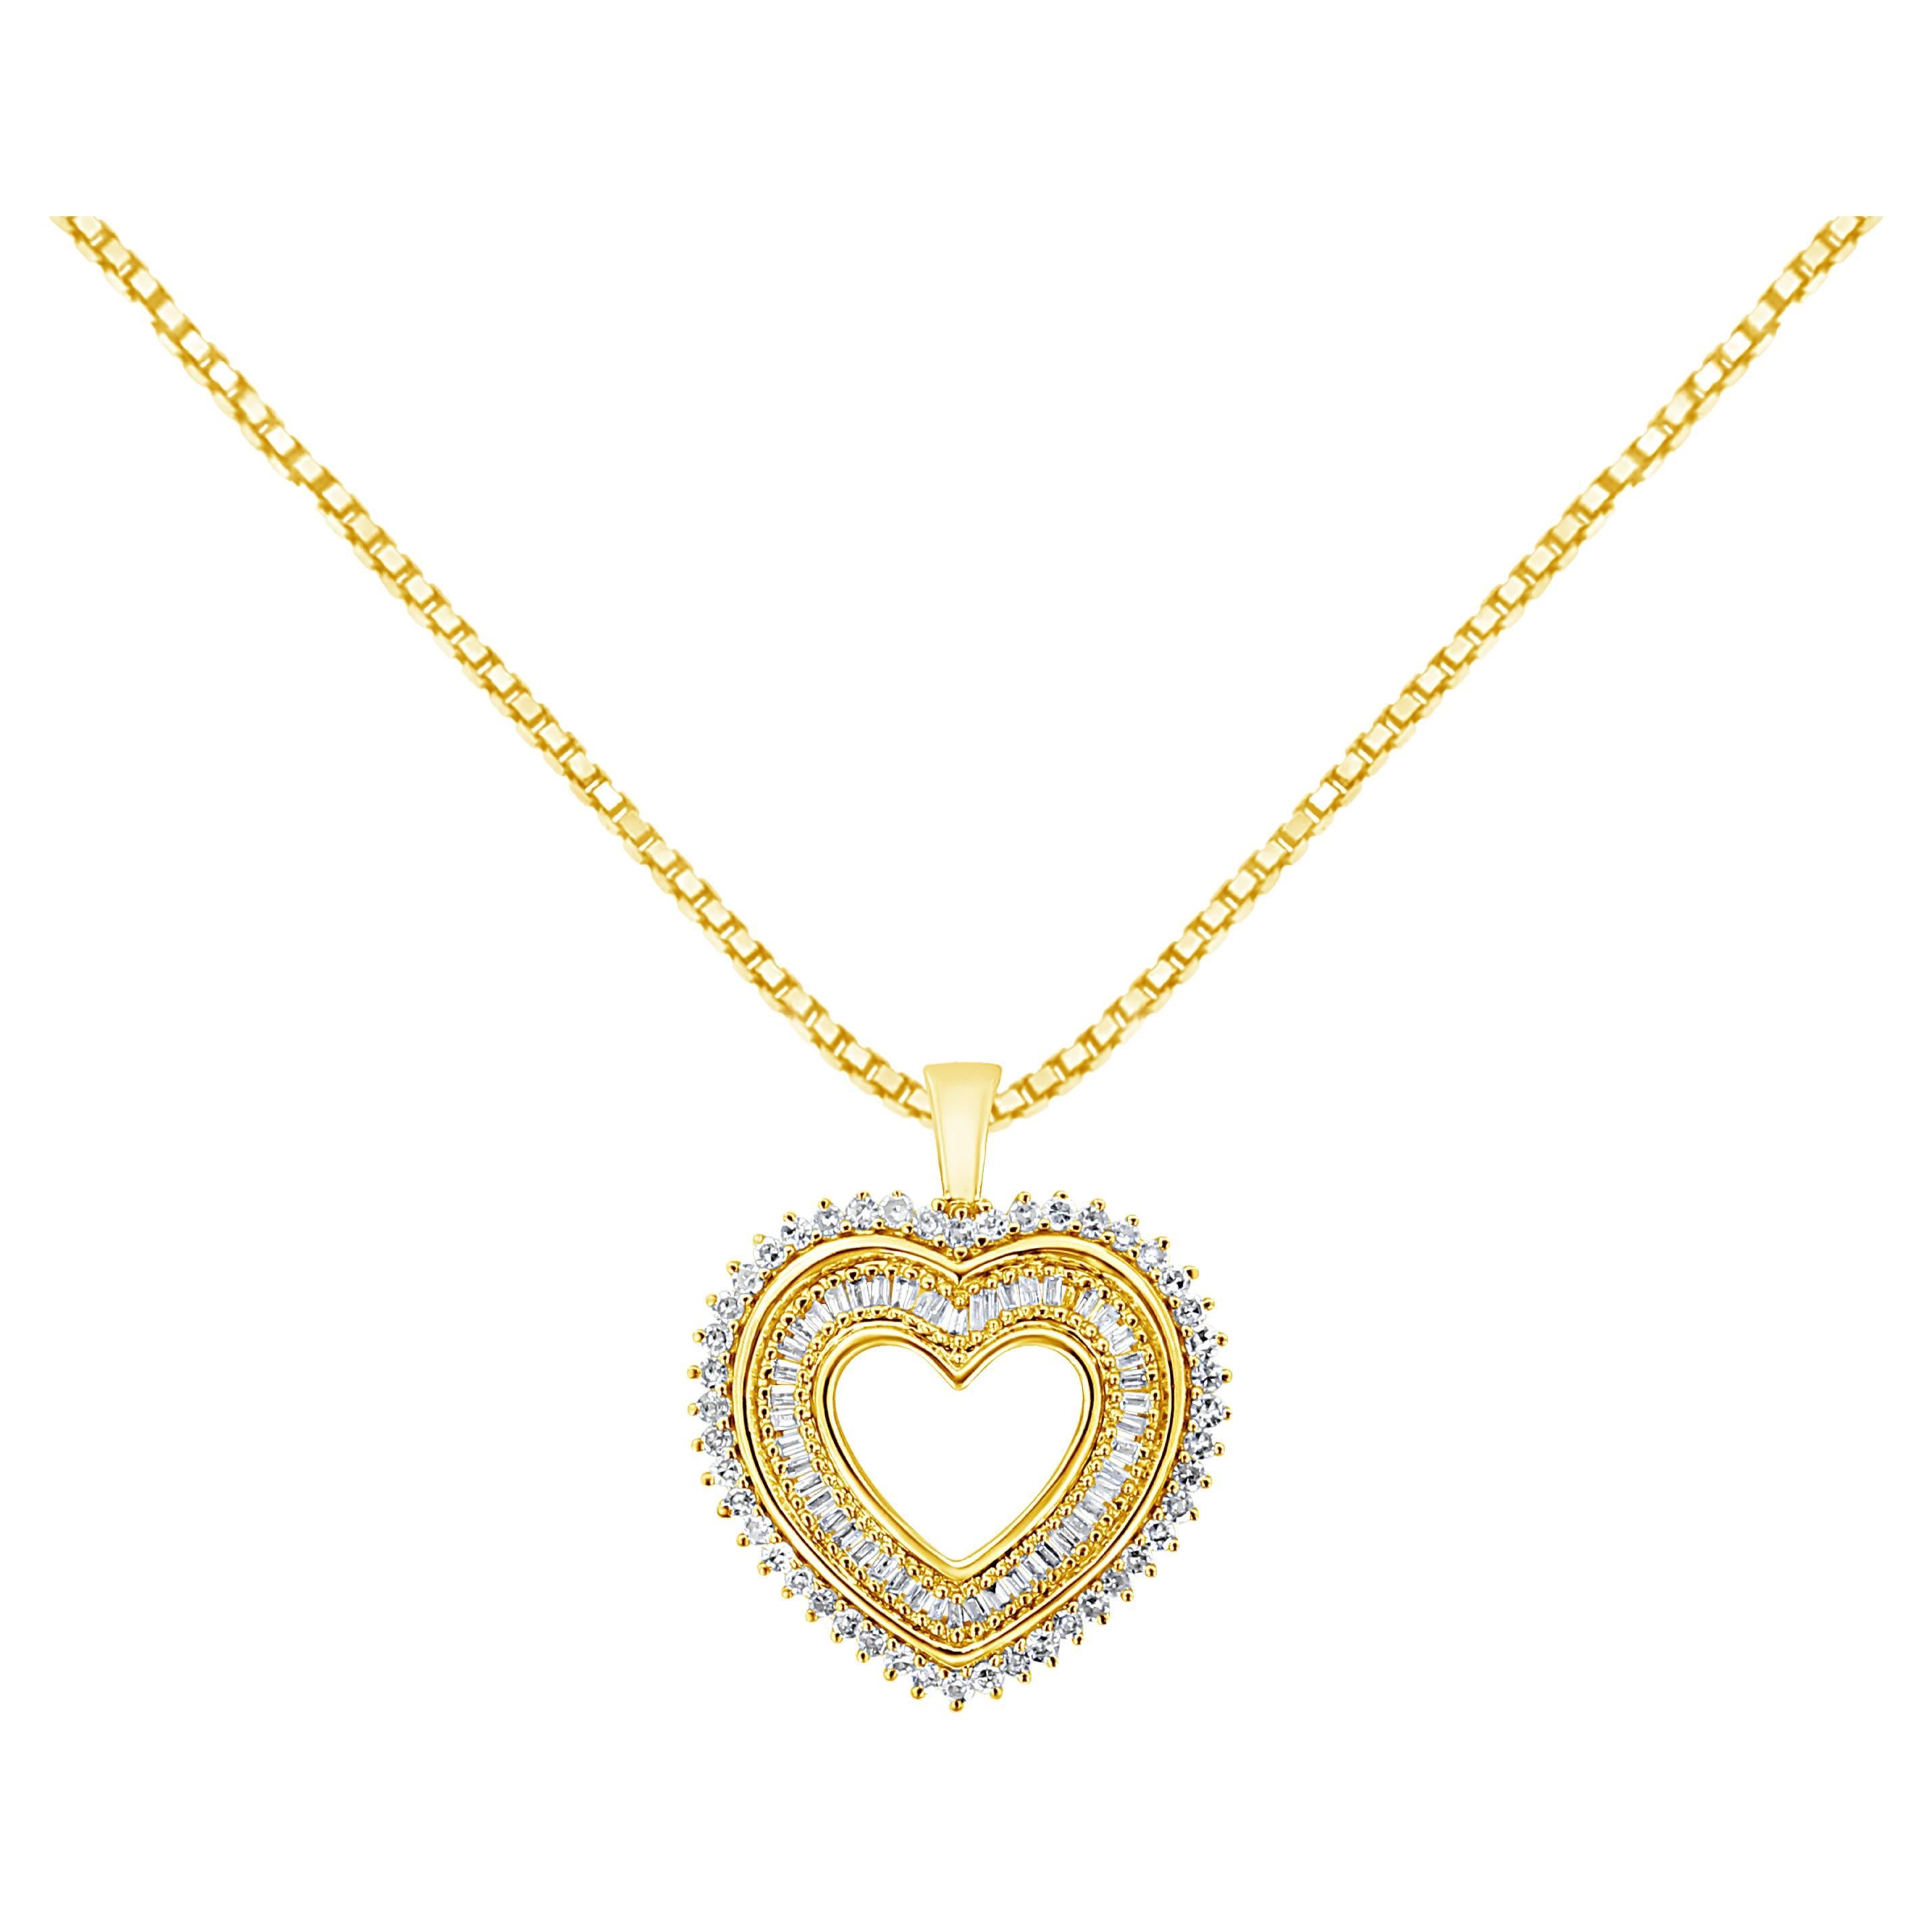 Yellow Gold Plated Sterling Silver 1.0 Carat Diamond Heart Pendant Necklace